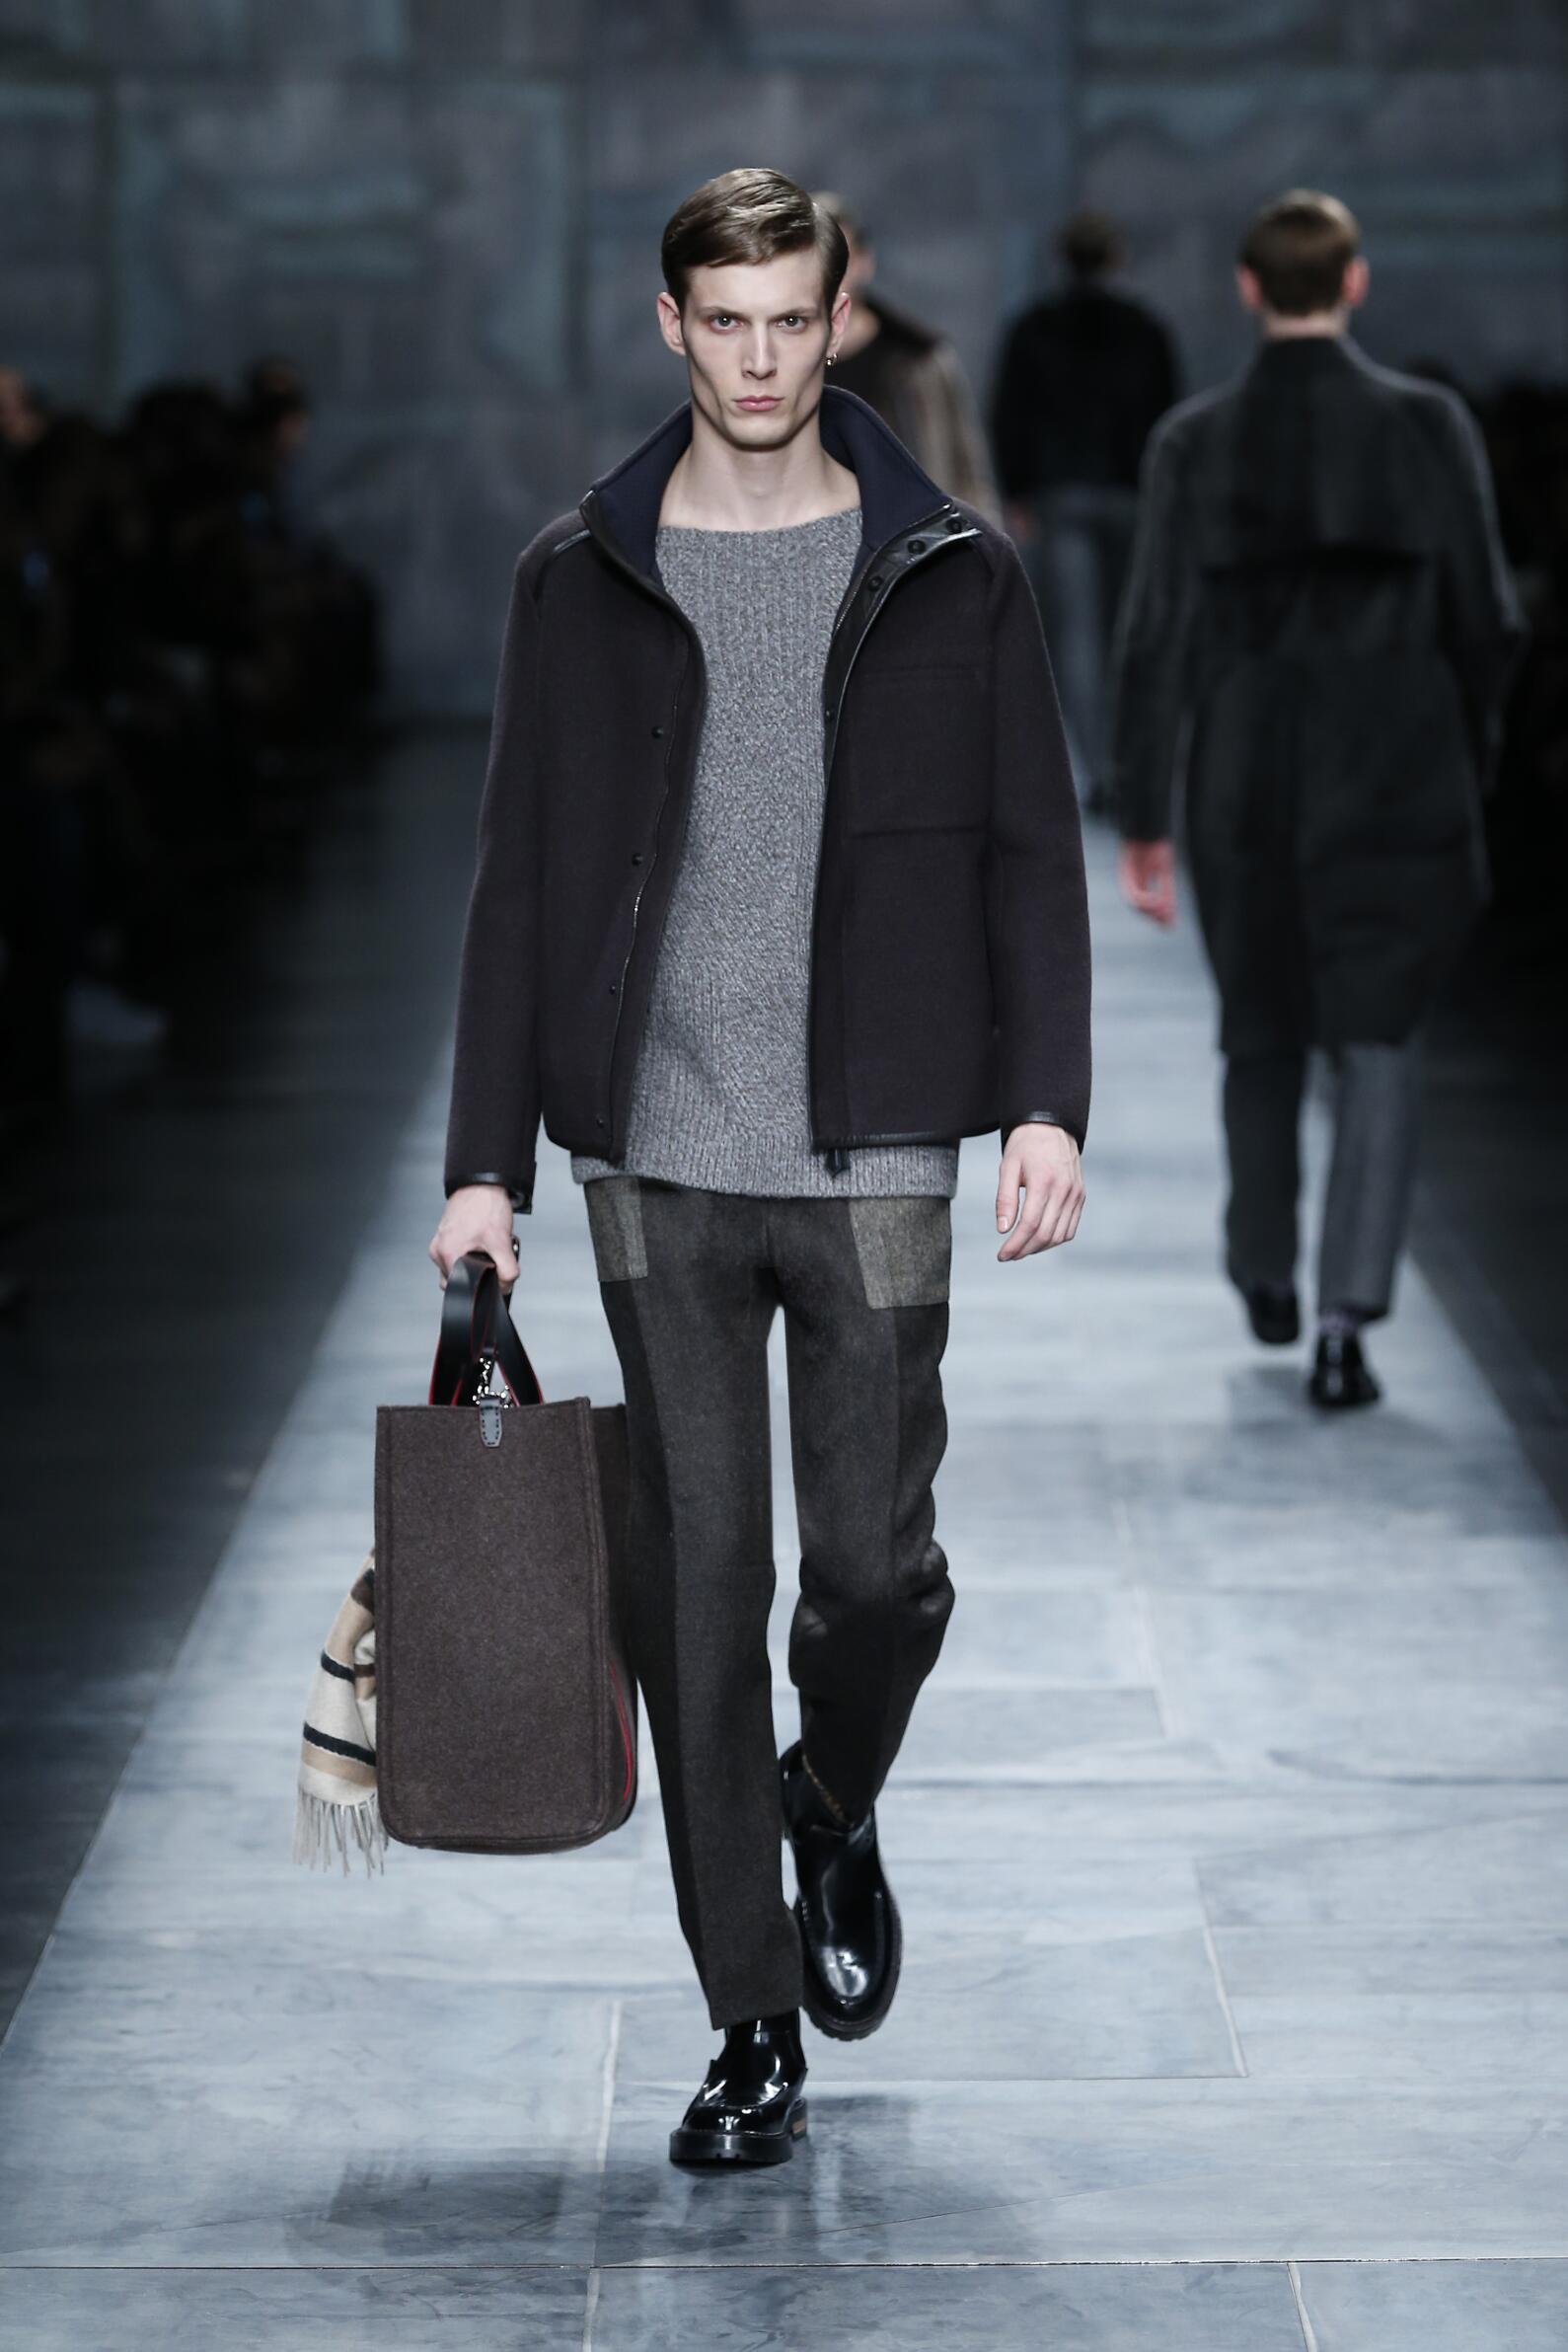 FENDI FALL WINTER 2015-16 MEN’S COLLECTION | The Skinny Beep